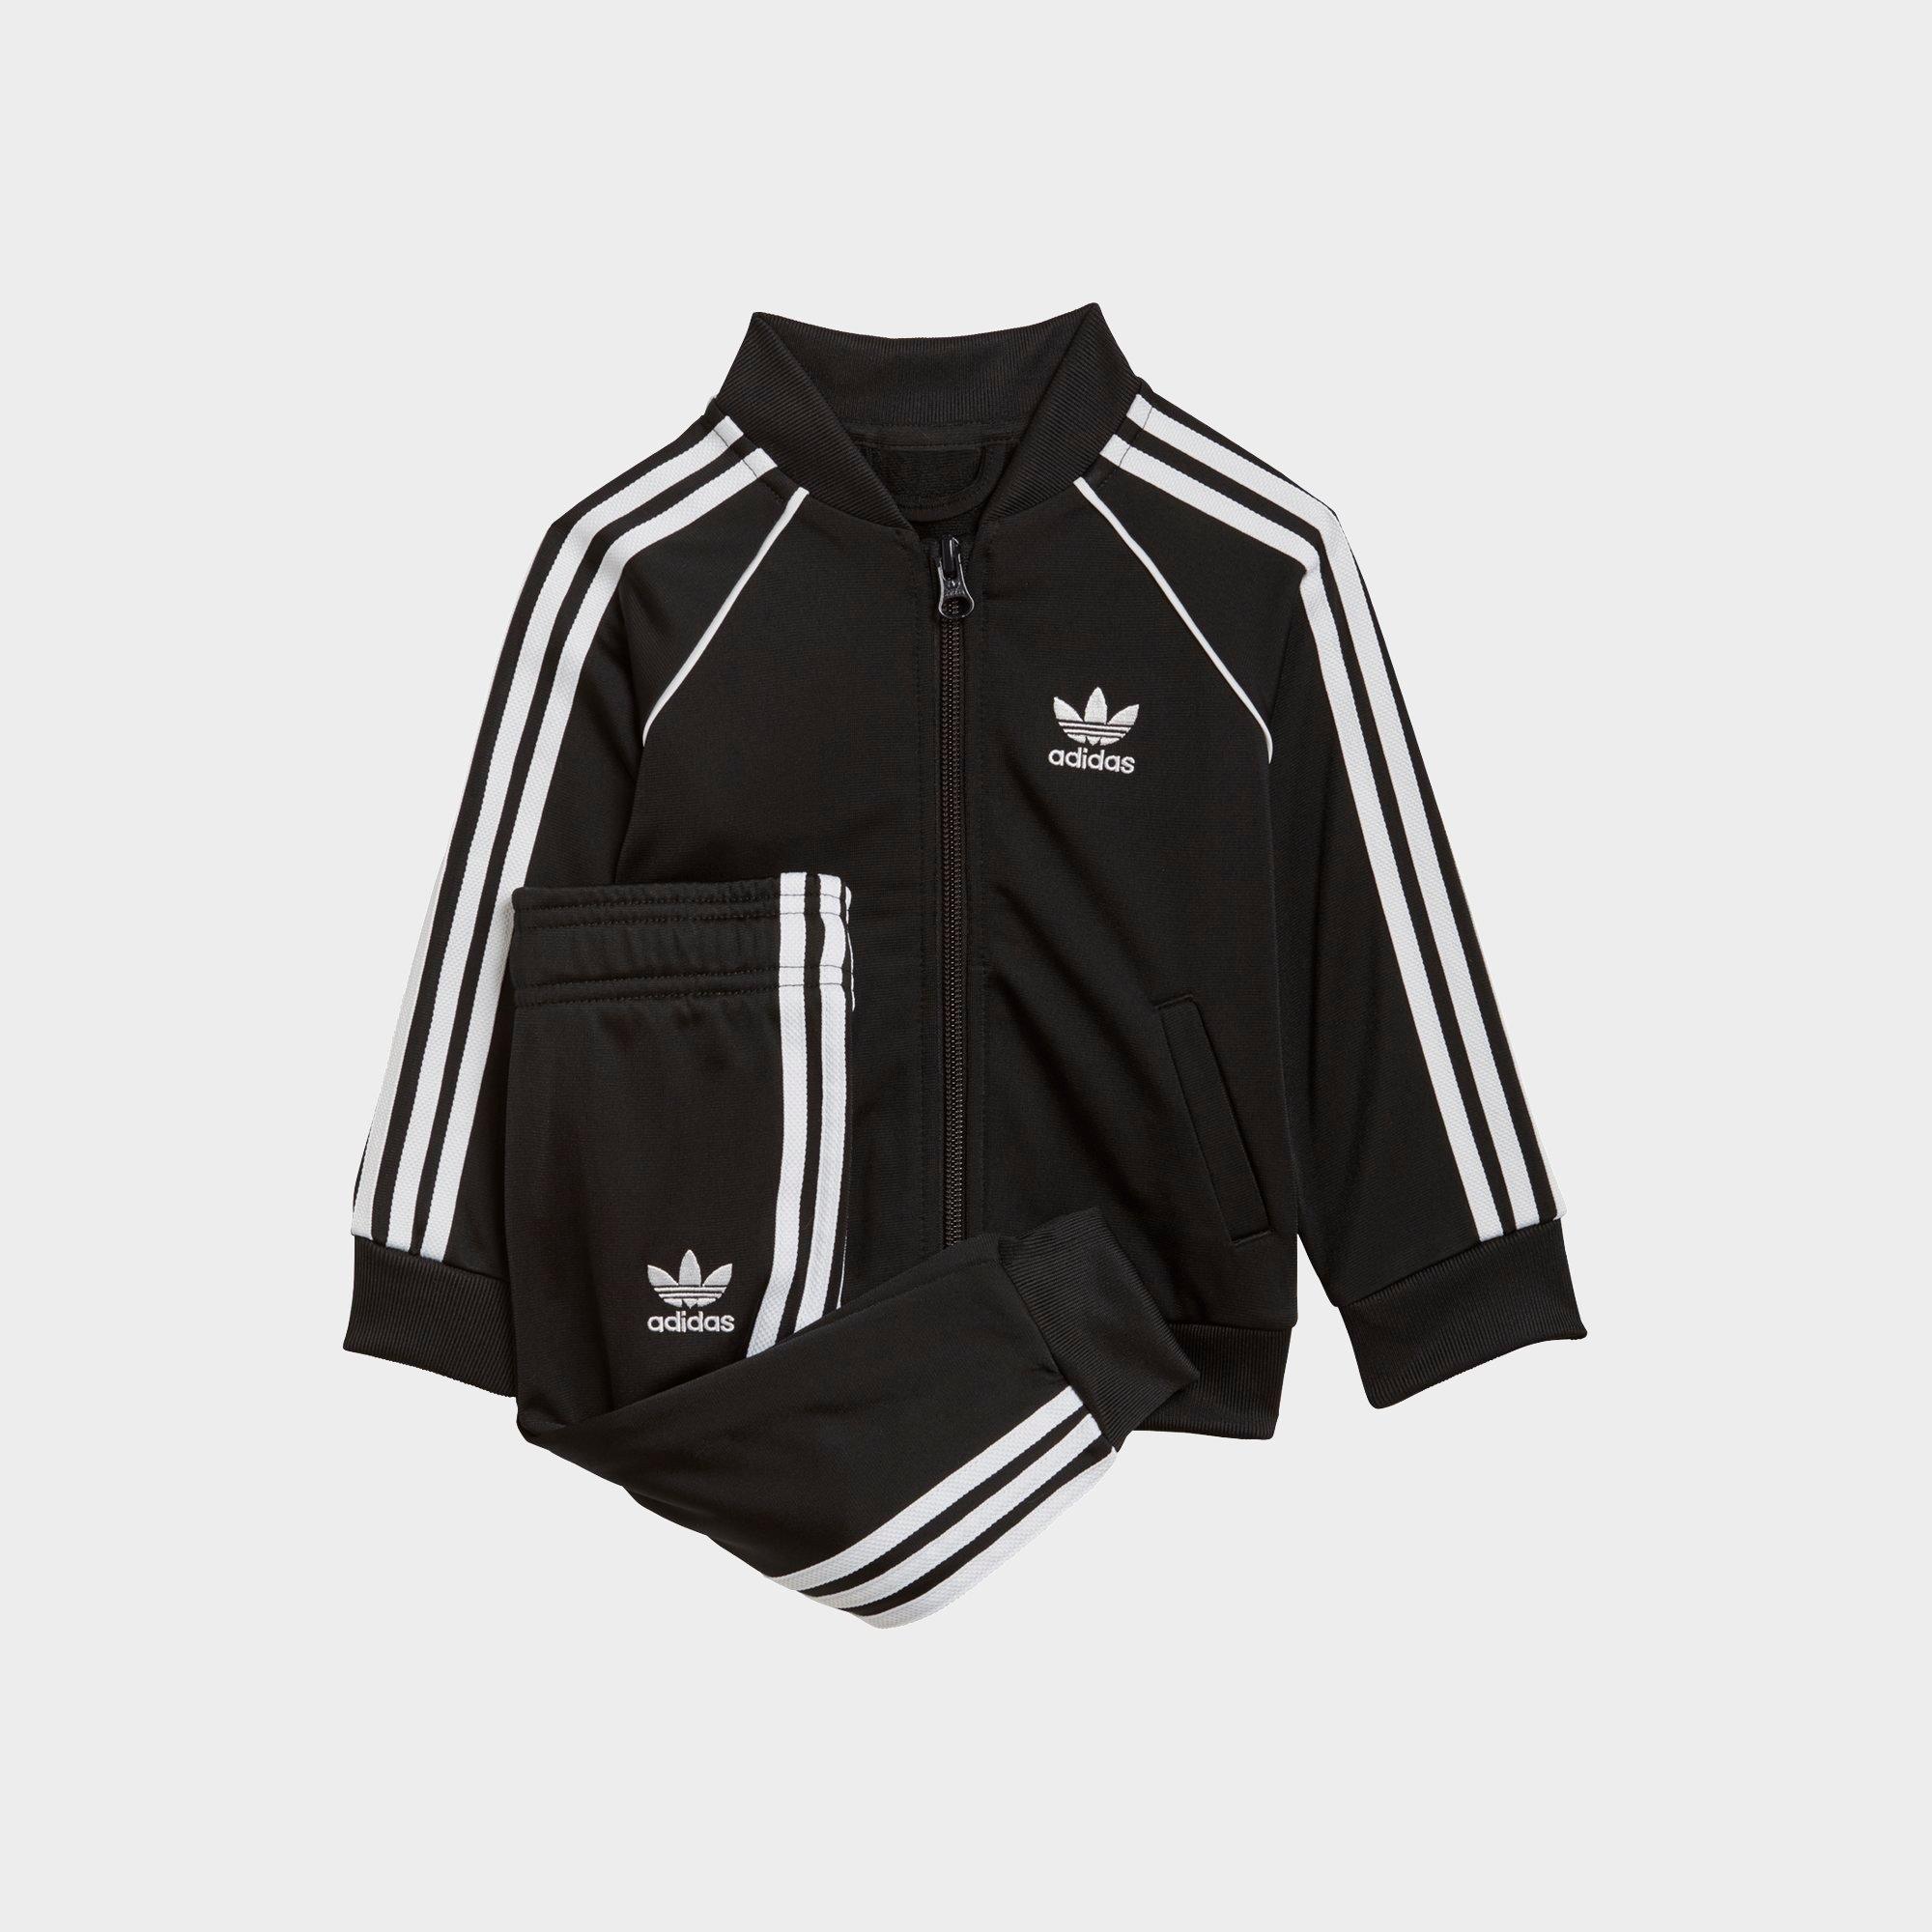 Infant and Kids' adidas Track Suit| JD Sports